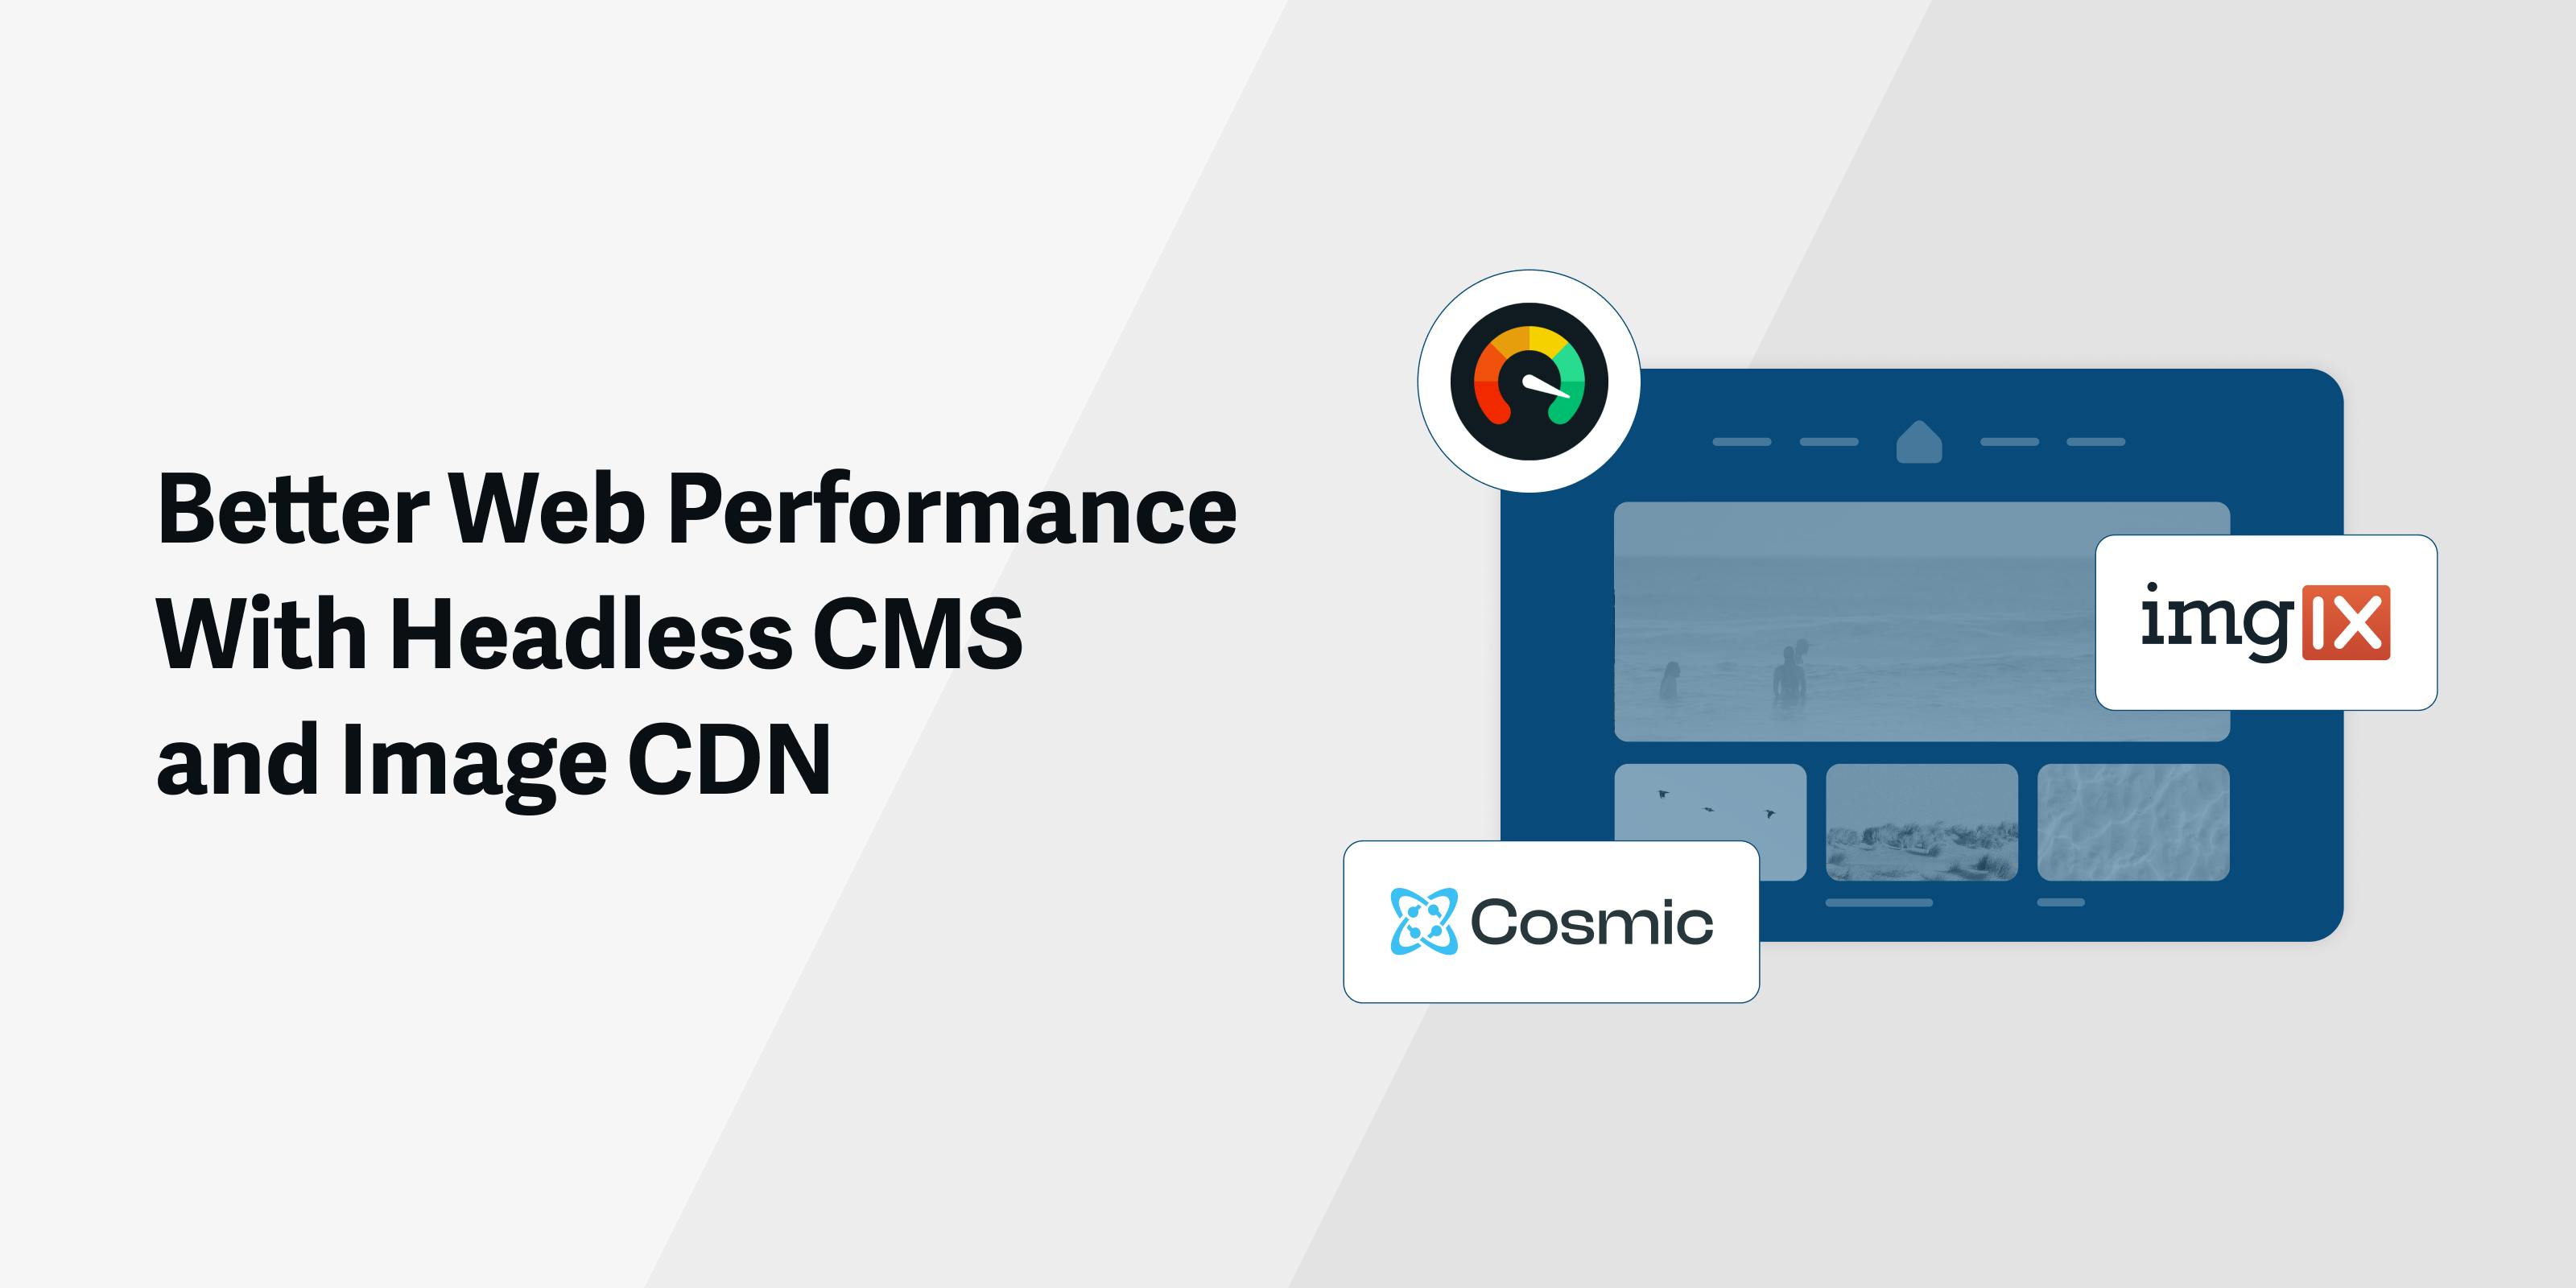 If you are looking to improve your web performance and you need development flexibility, Cosmic and imgix are the right combination. Cosmic offers scalability, powerful content editing, and many integration options, whereas imgix automates image optimization and delivery. Together, they significantly enhance the web experience and improve user engagement, SEO